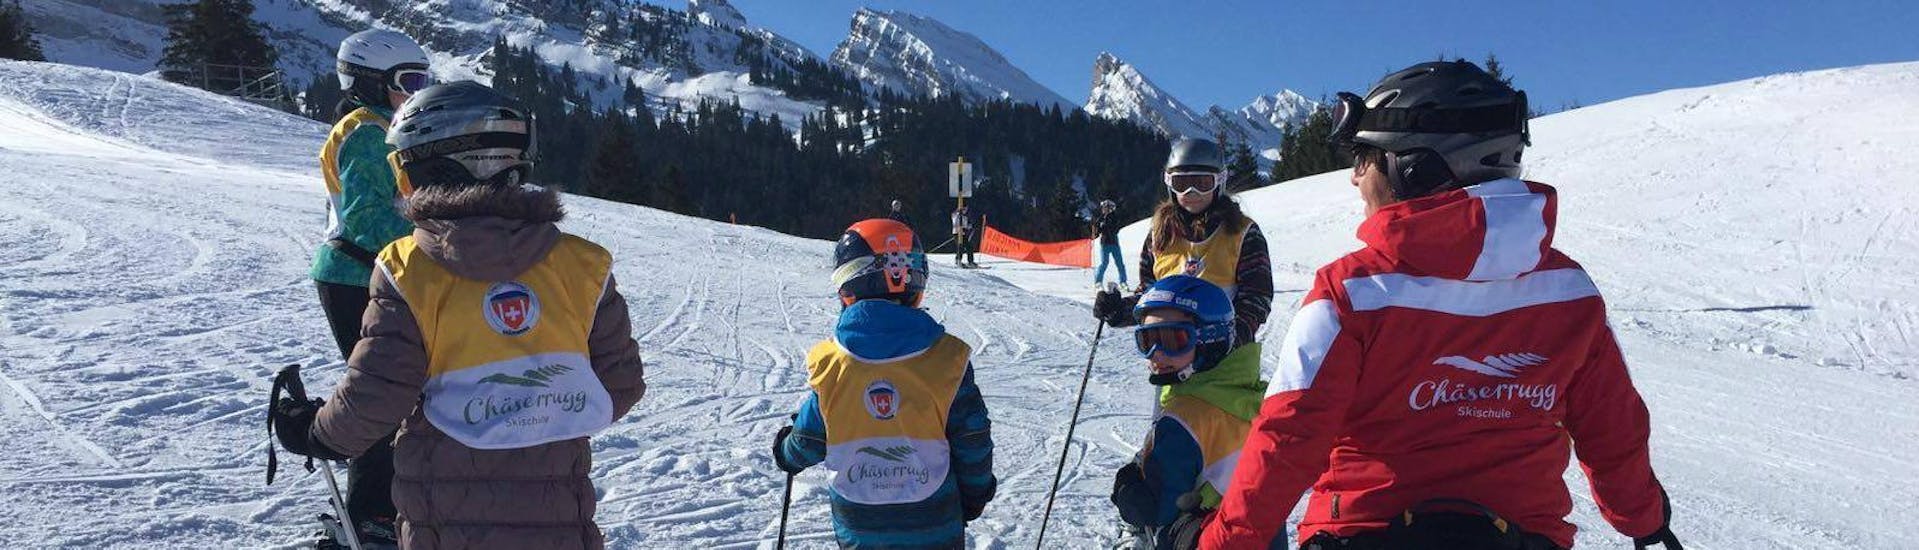 During the ski lessons with Swiss Ski School Chäserrugg, a ski instructor and her group of young skiers are admiring the beautiful mountains of the Chäserrugg ski resort.